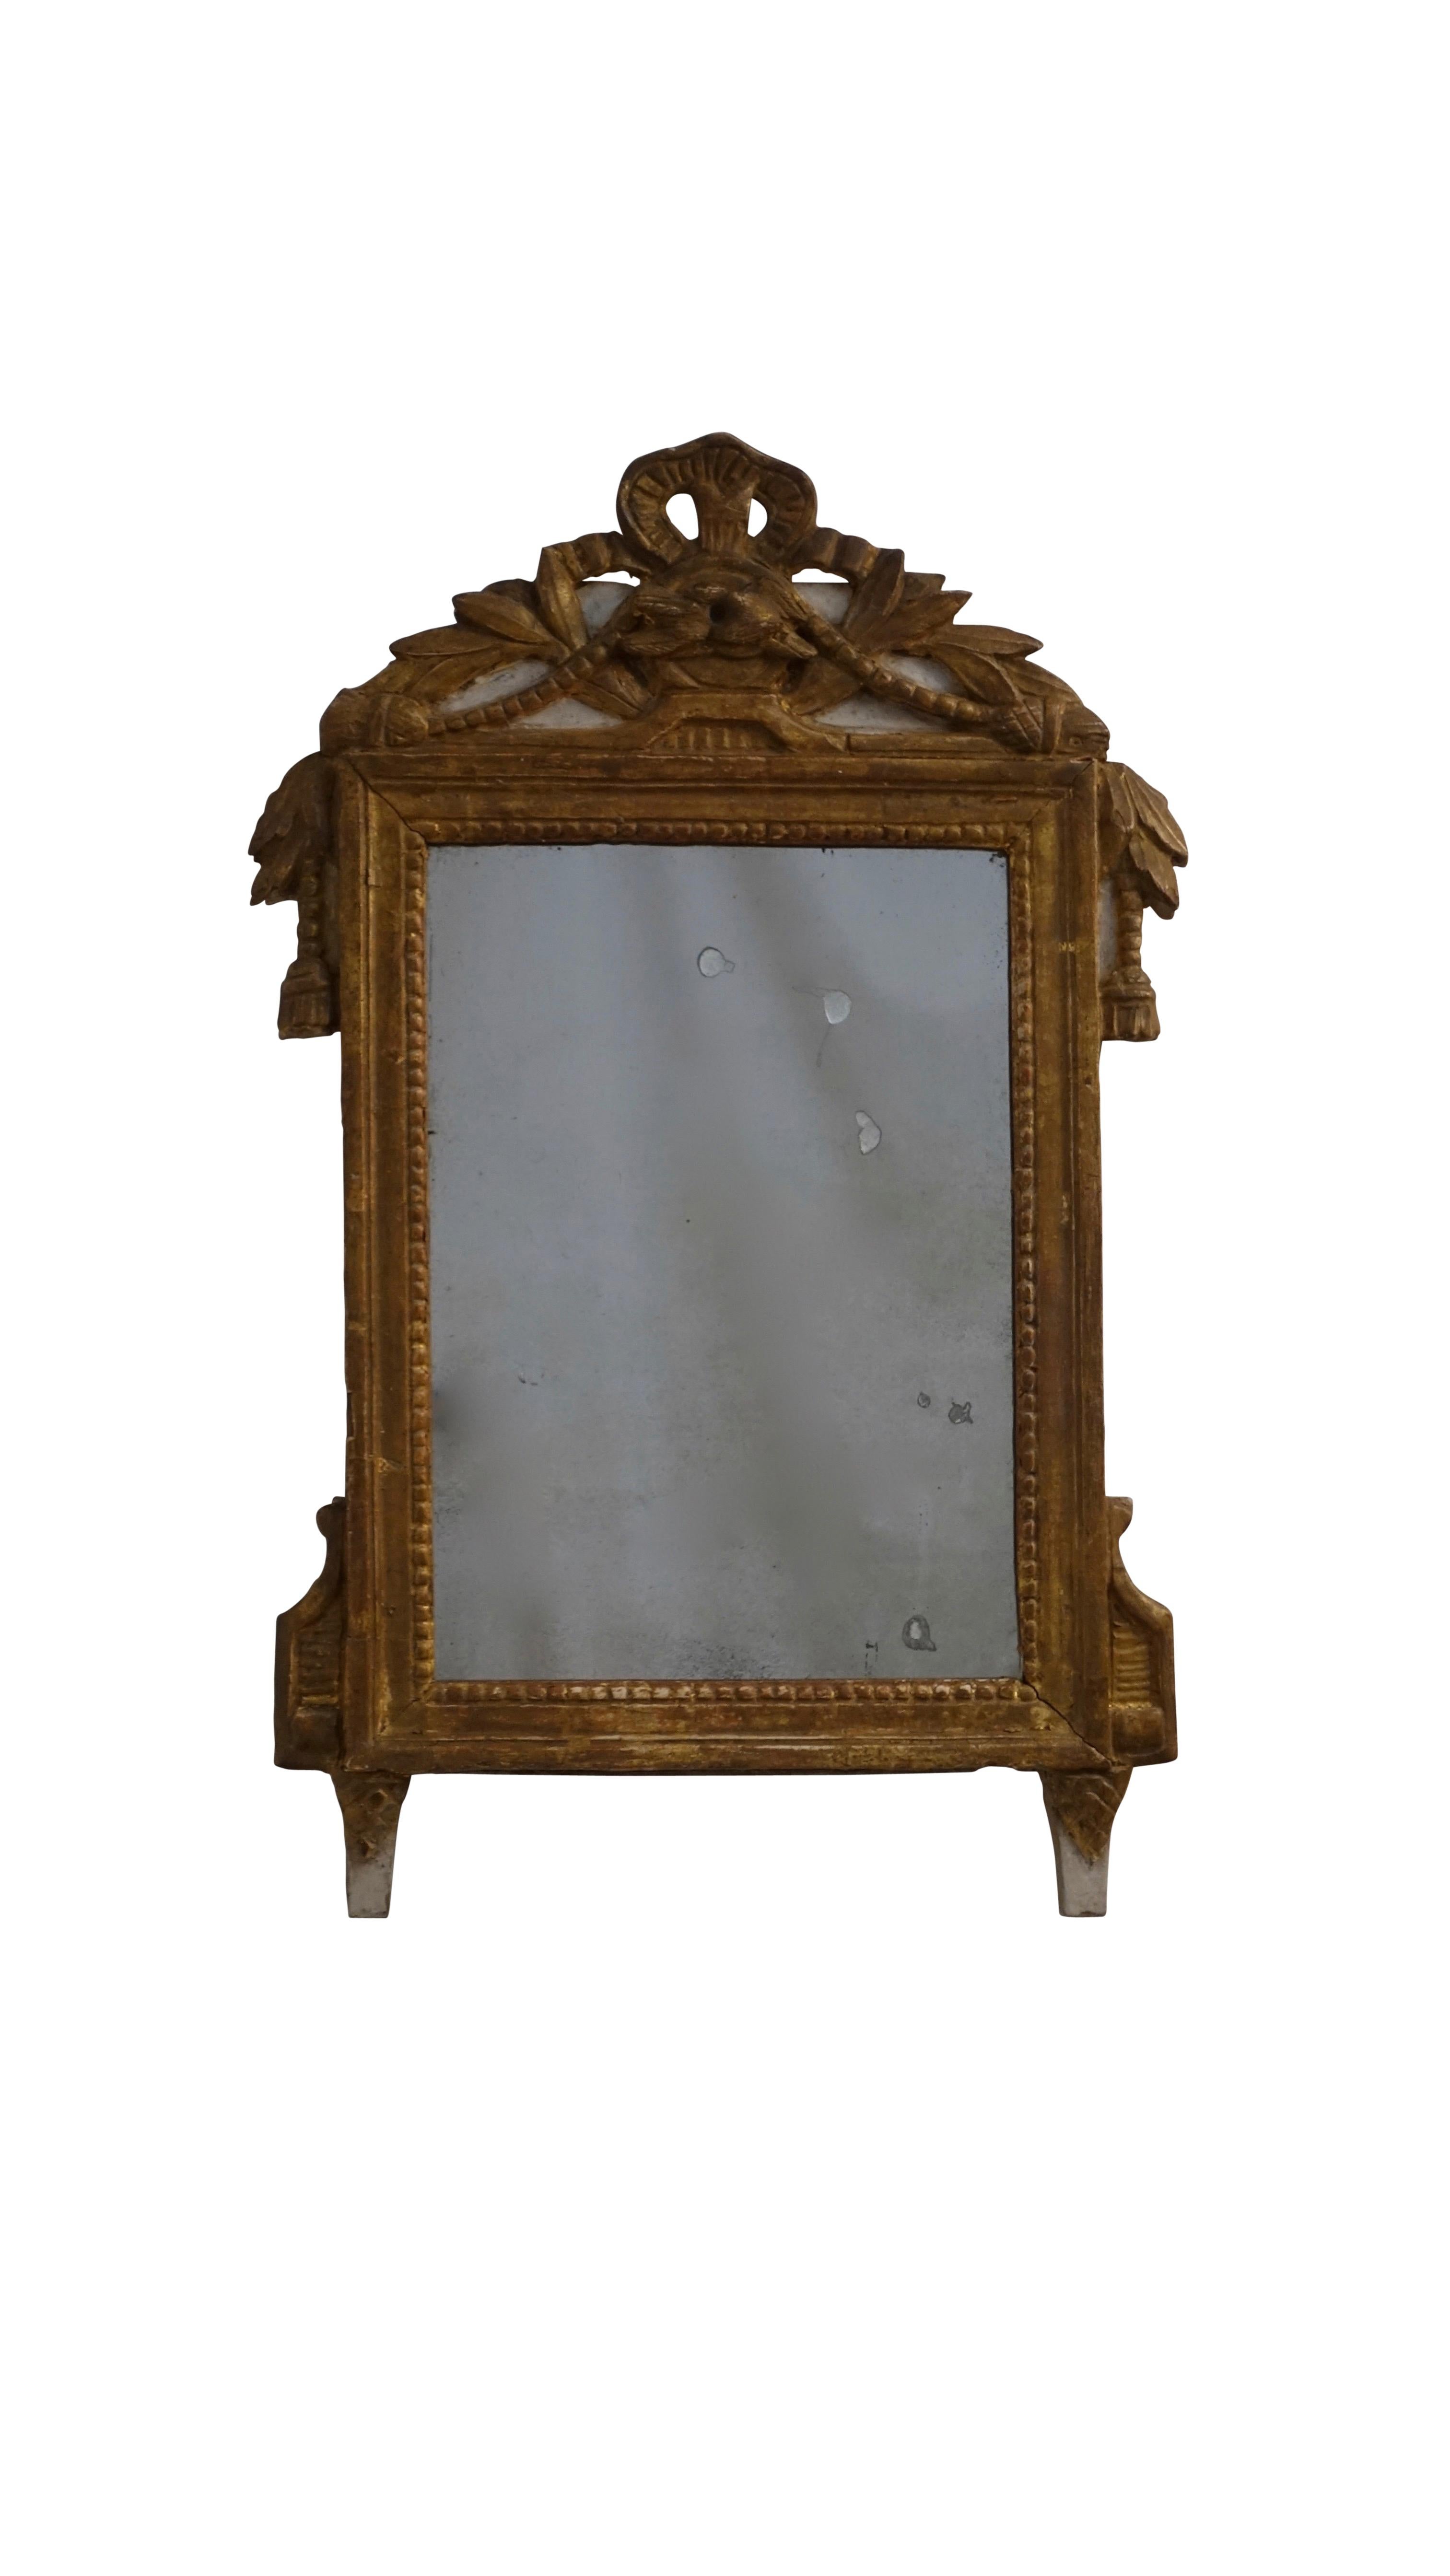 Louis XV hand carved and gilt boudoir mirror with parcel gray painting. Having a tied ribbon cartouche above a pair of love birds with tasseled cord and laurel leaves. Original mirror shows expected clouding and age. France, mid 18th century.